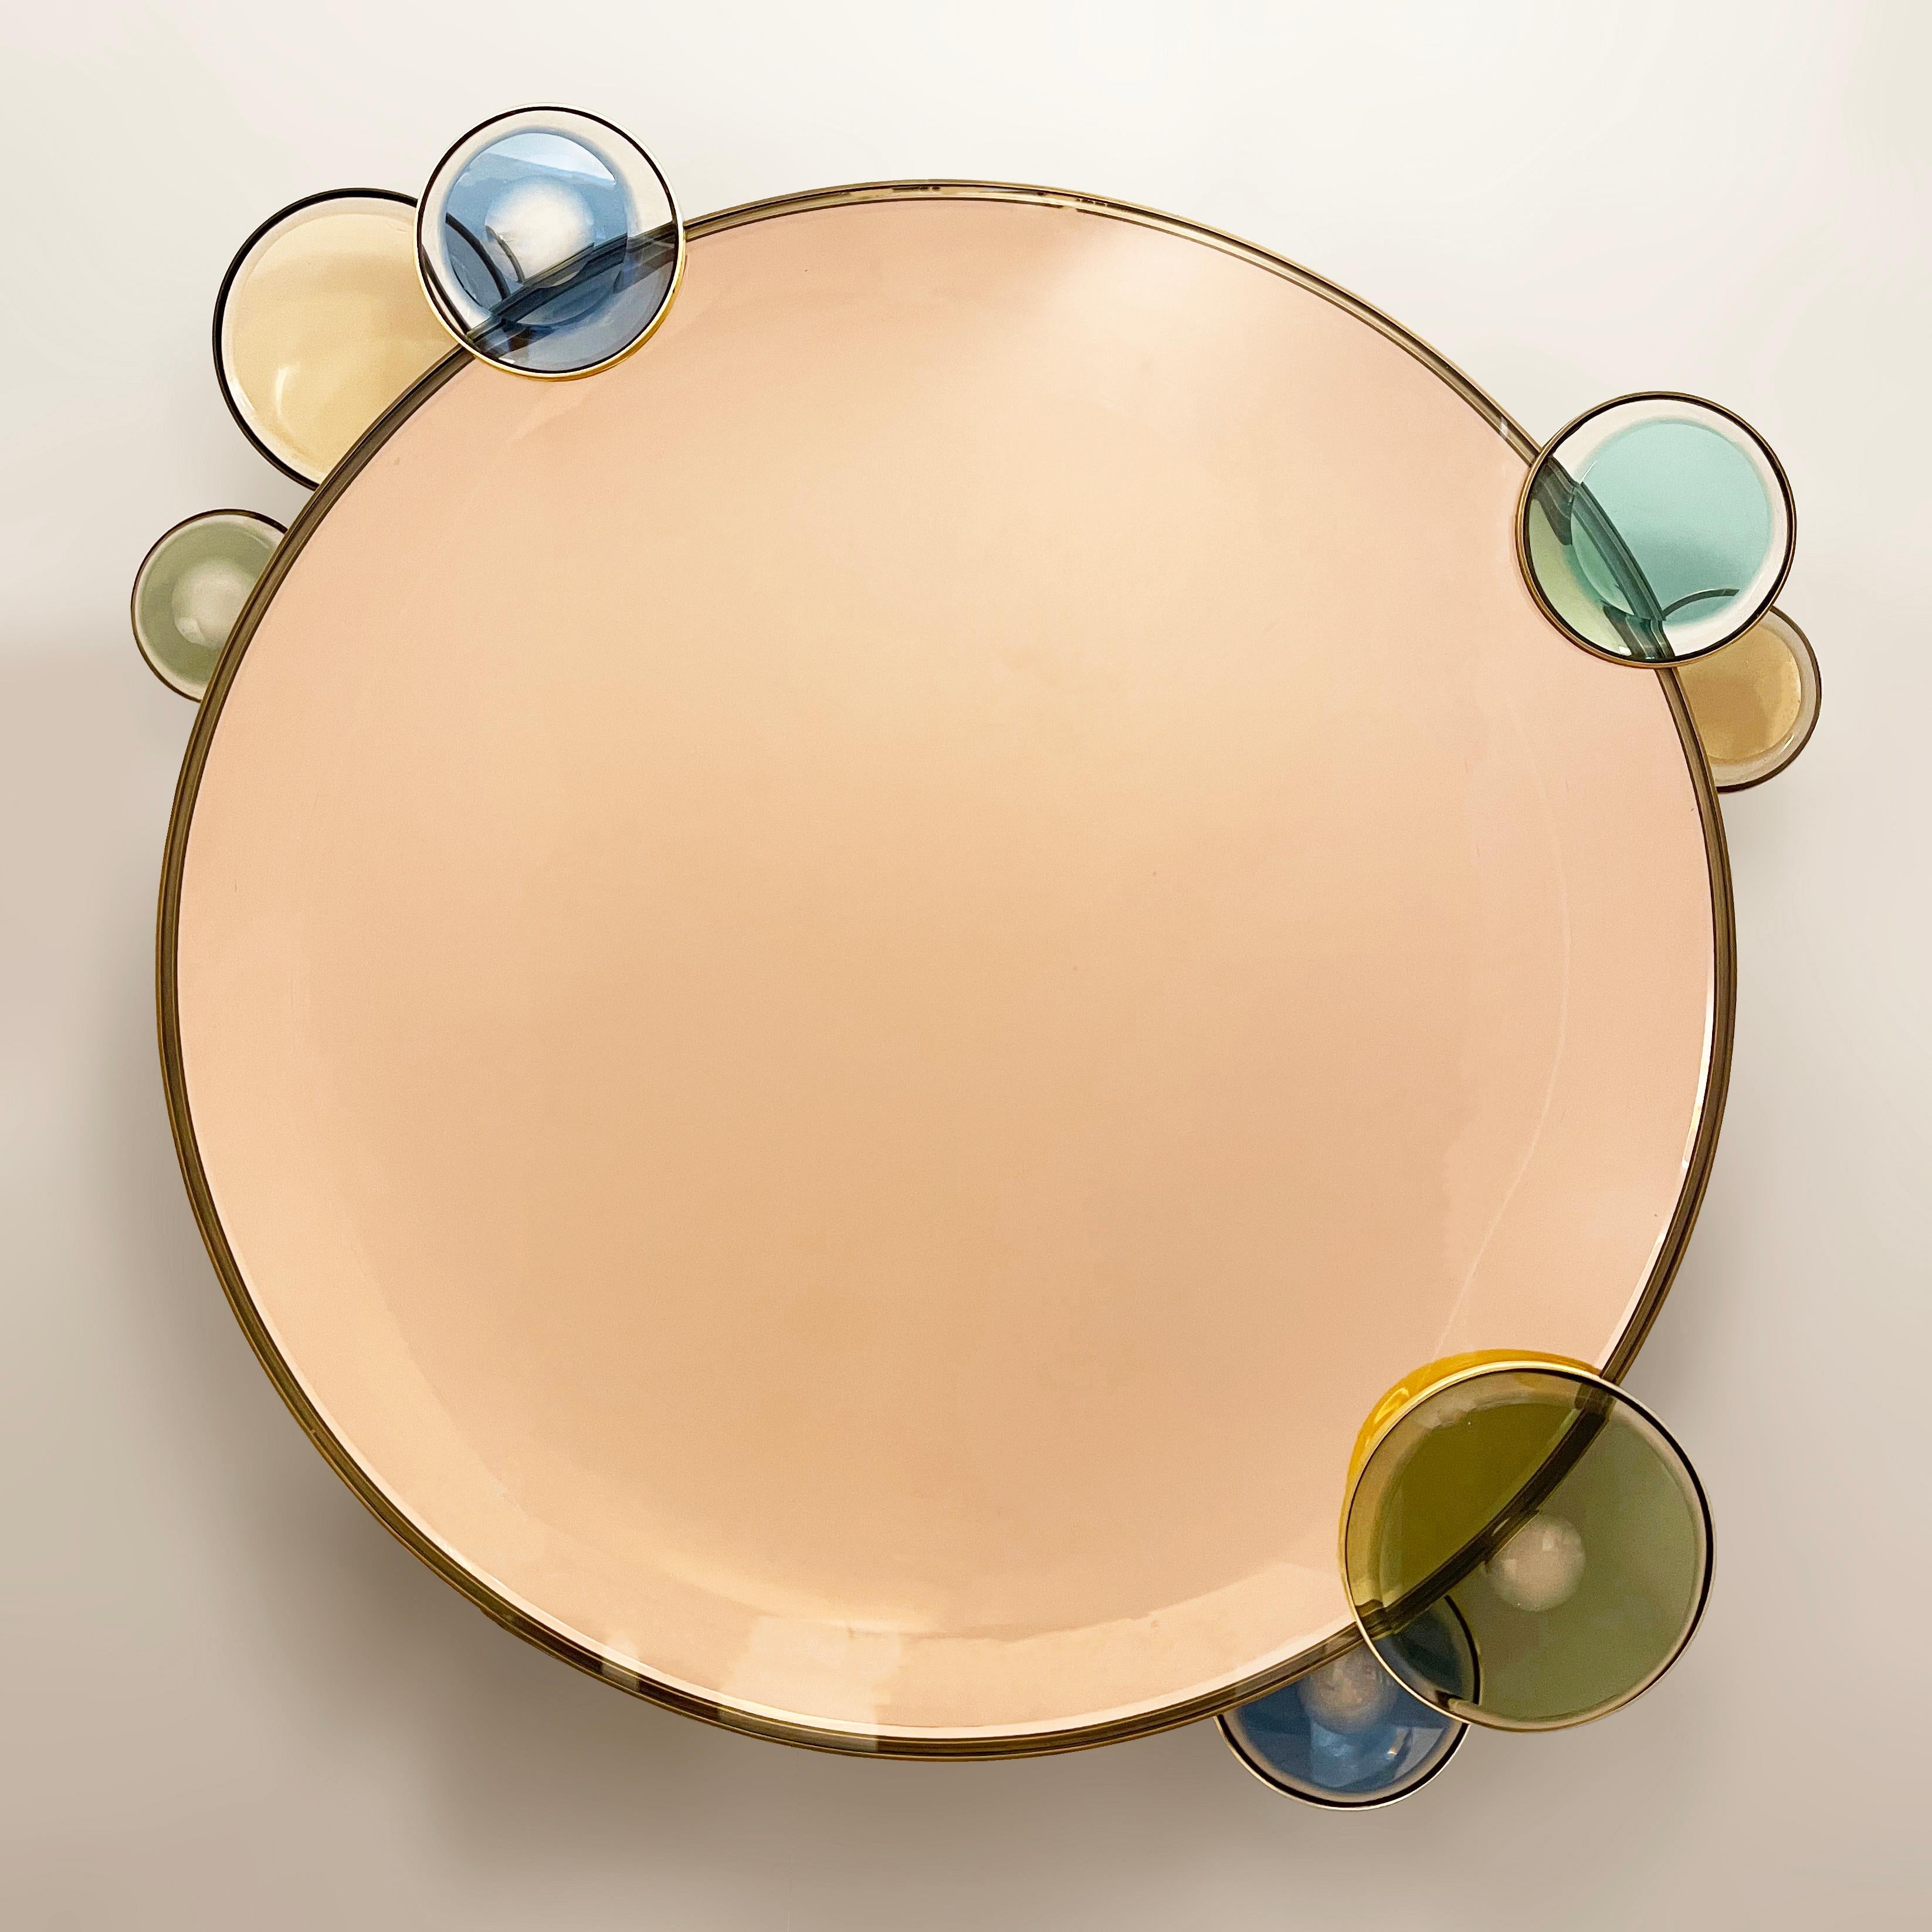 The Vitreus with its tinted reflecting concave glass, lends itself to be both mirror and wall sculpture. Colored glass medallions mounted to its brass frame provide an additional pop of color while a flat clear glass on top of the concave mirror